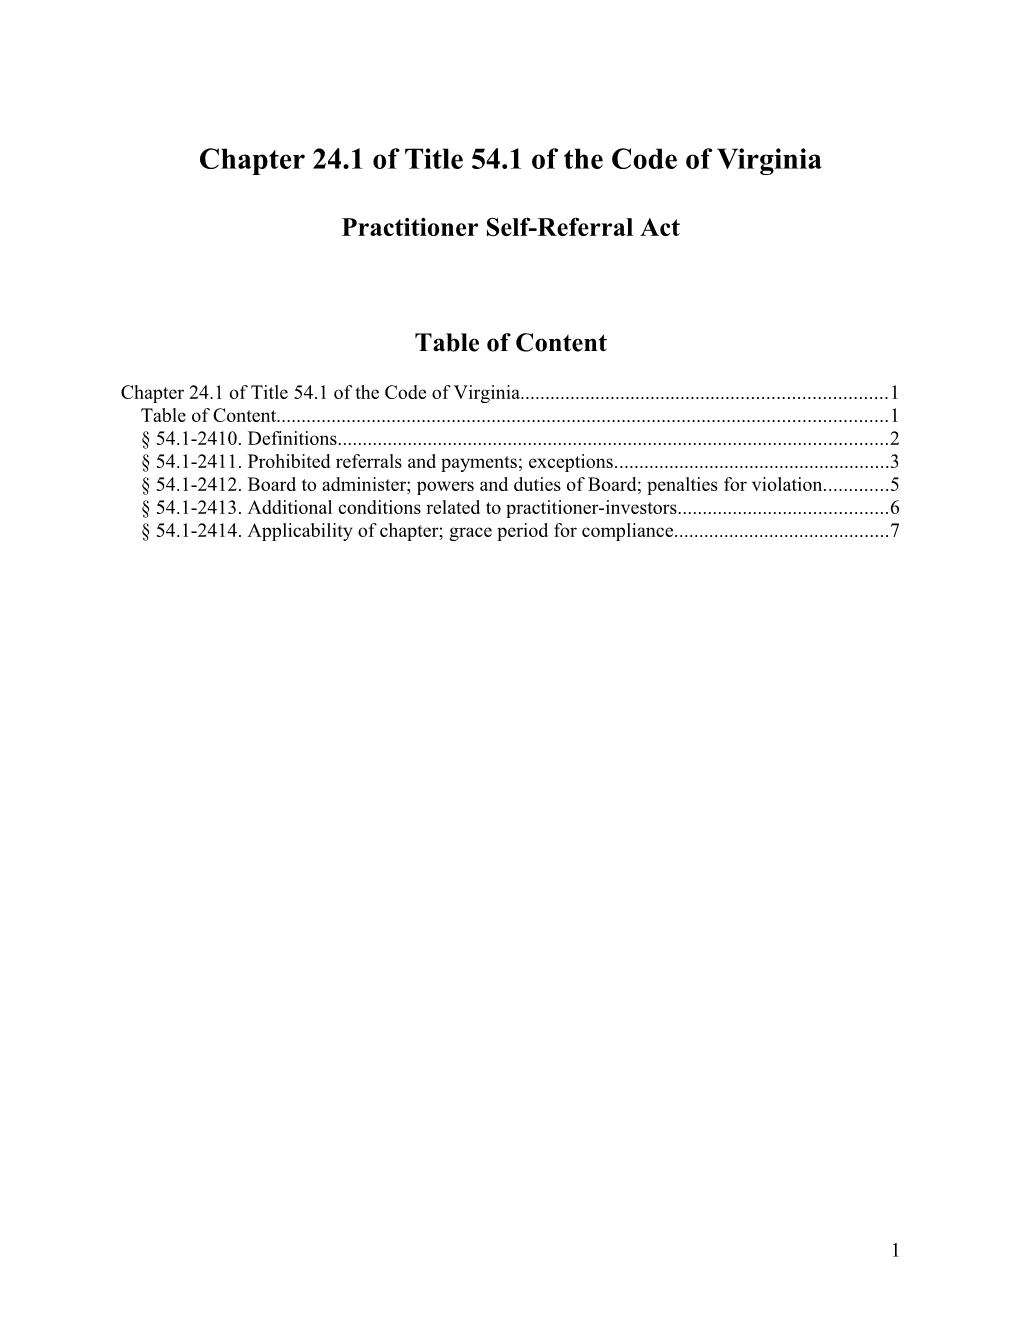 Chapter 24.1 of Title 54.1 of the Code of Virginia